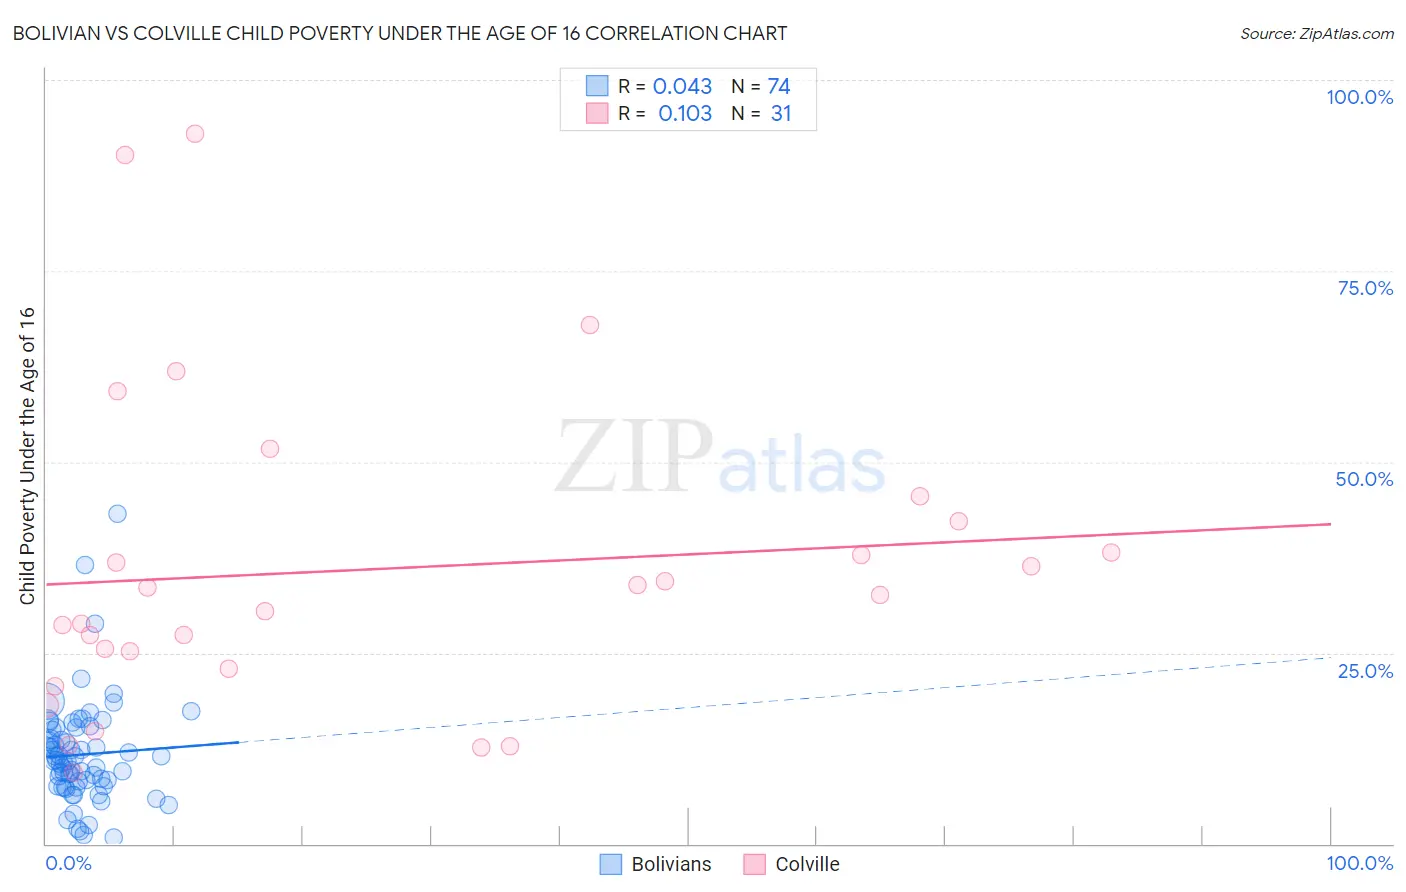 Bolivian vs Colville Child Poverty Under the Age of 16